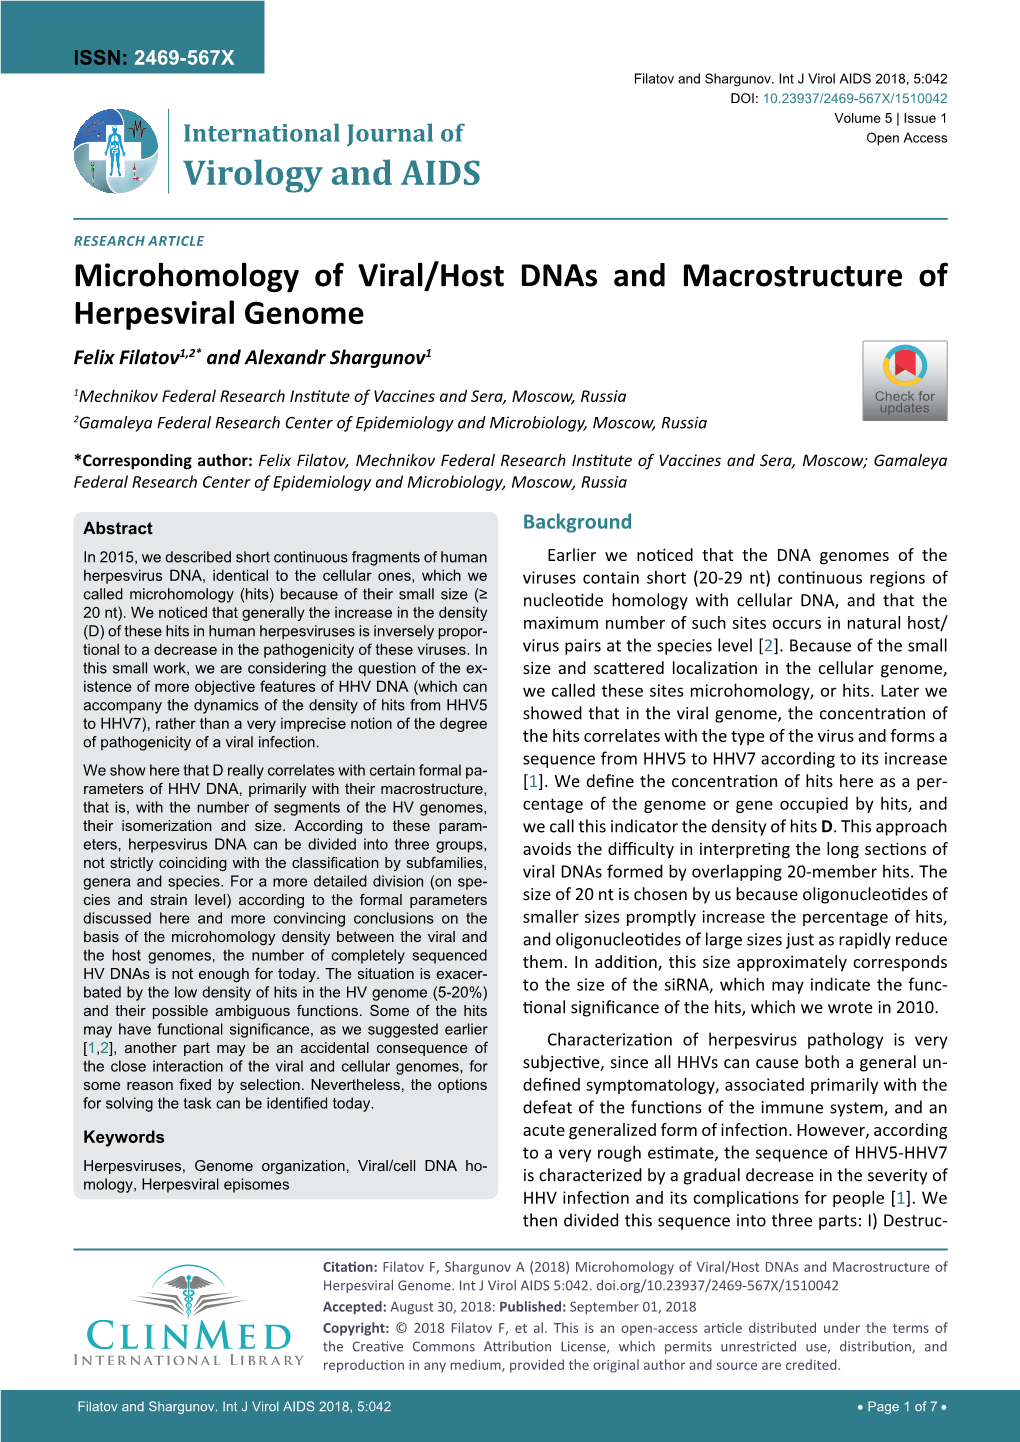 Microhomology of Viral/Host Dnas and Macrostructure of Herpesviral Genome Felix Filatov1,2* and Alexandr Shargunov1